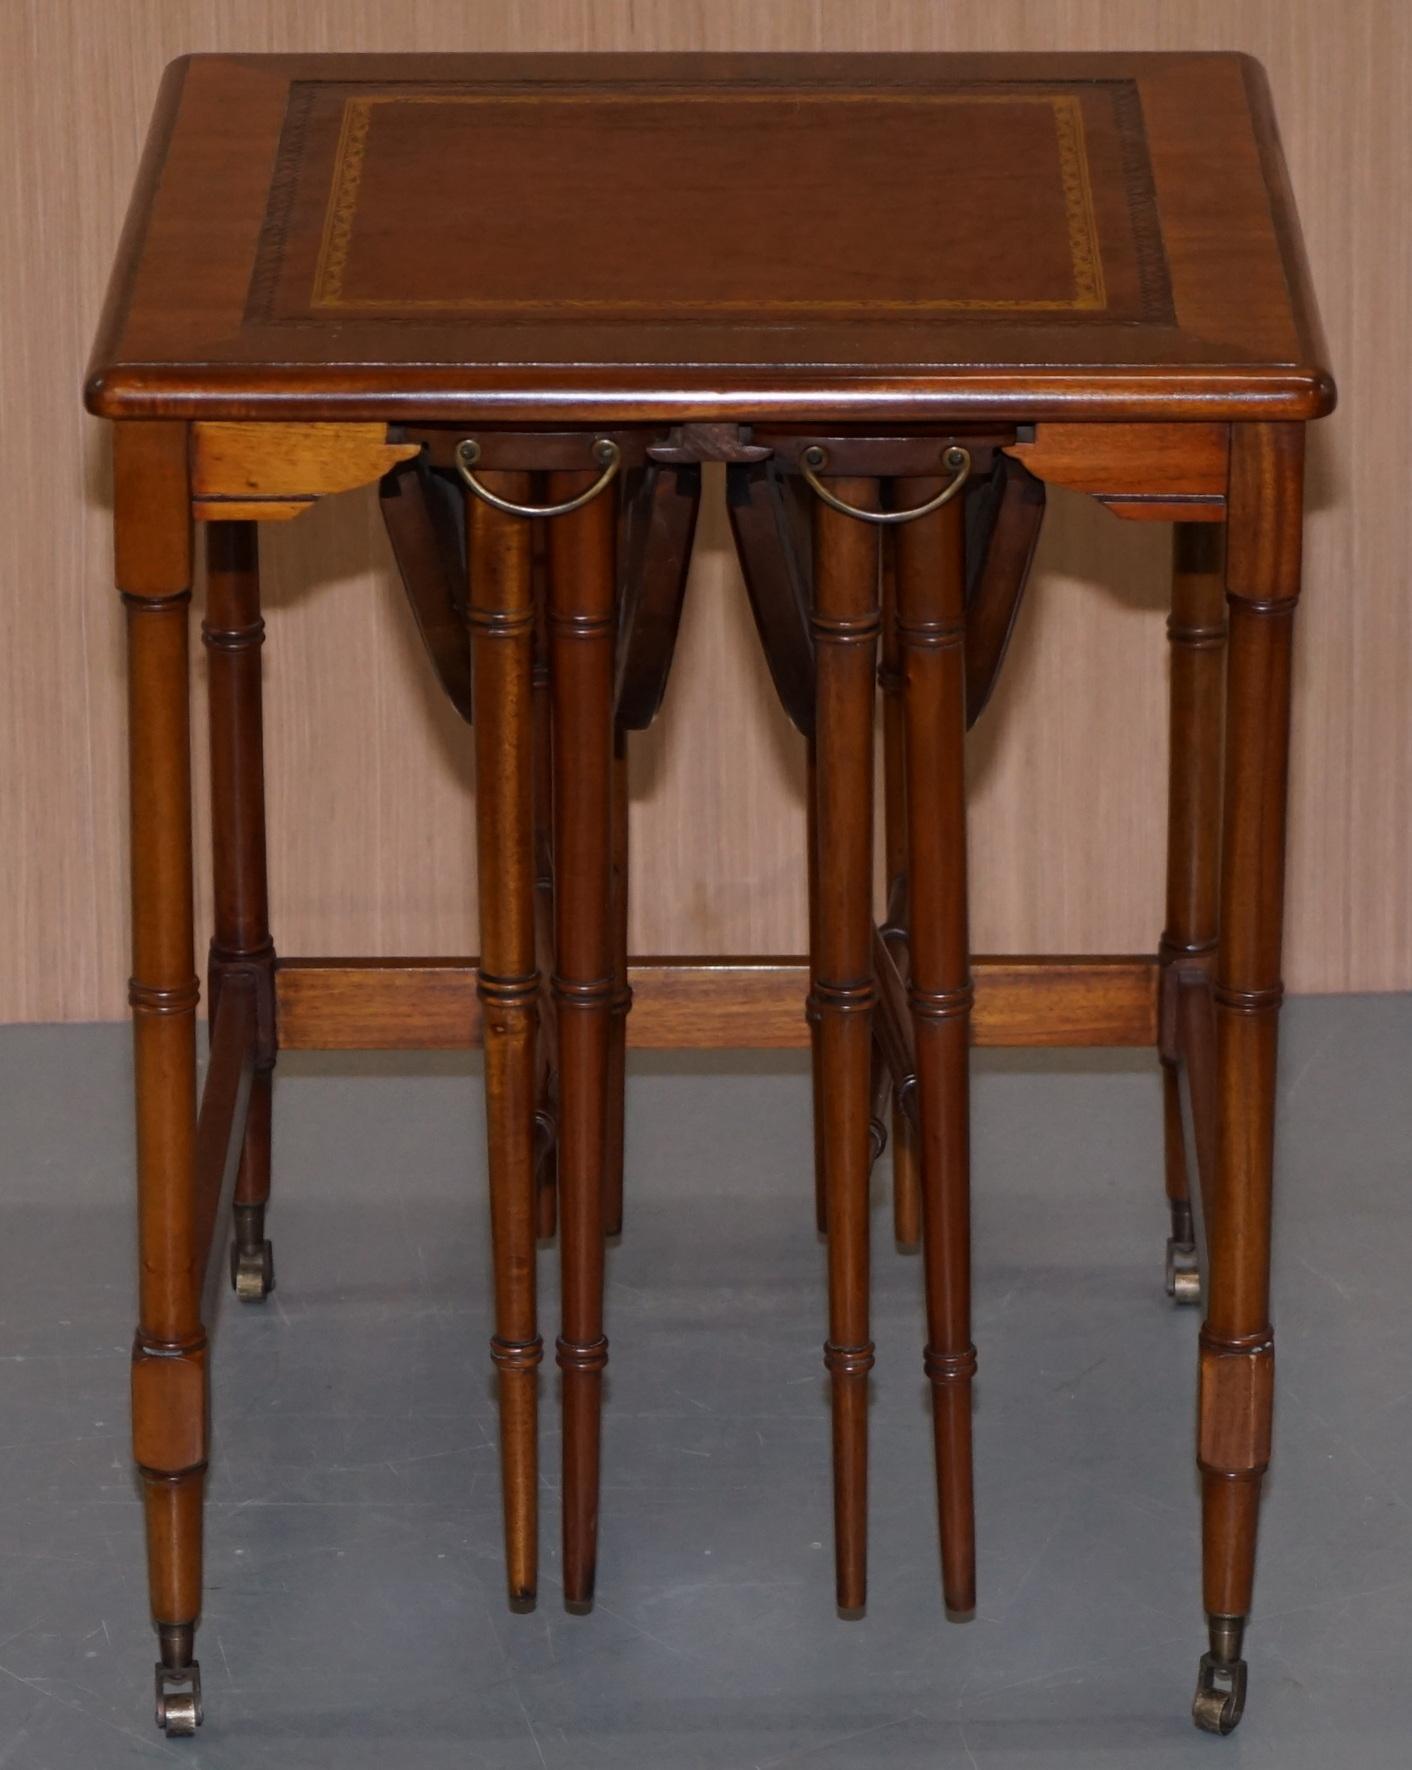 Hand-Crafted Rare Pair of Military Campaign Side Tables with Two Folded Round Tables Nested